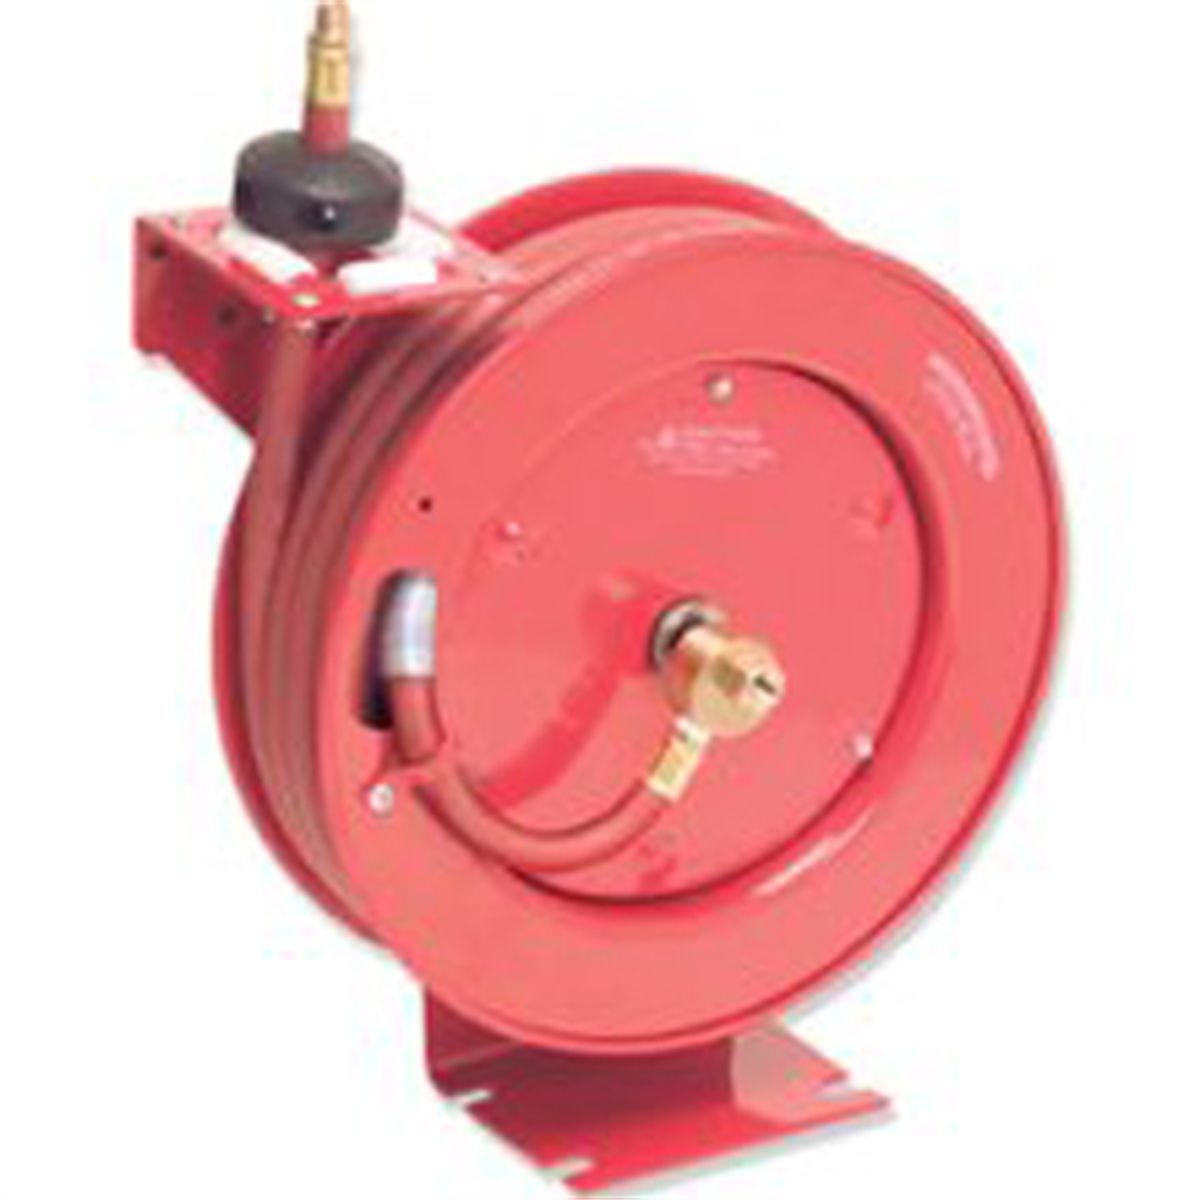 Air Hose Reels Wall Mount: SP Systems Air Hose Reel by SP Systems